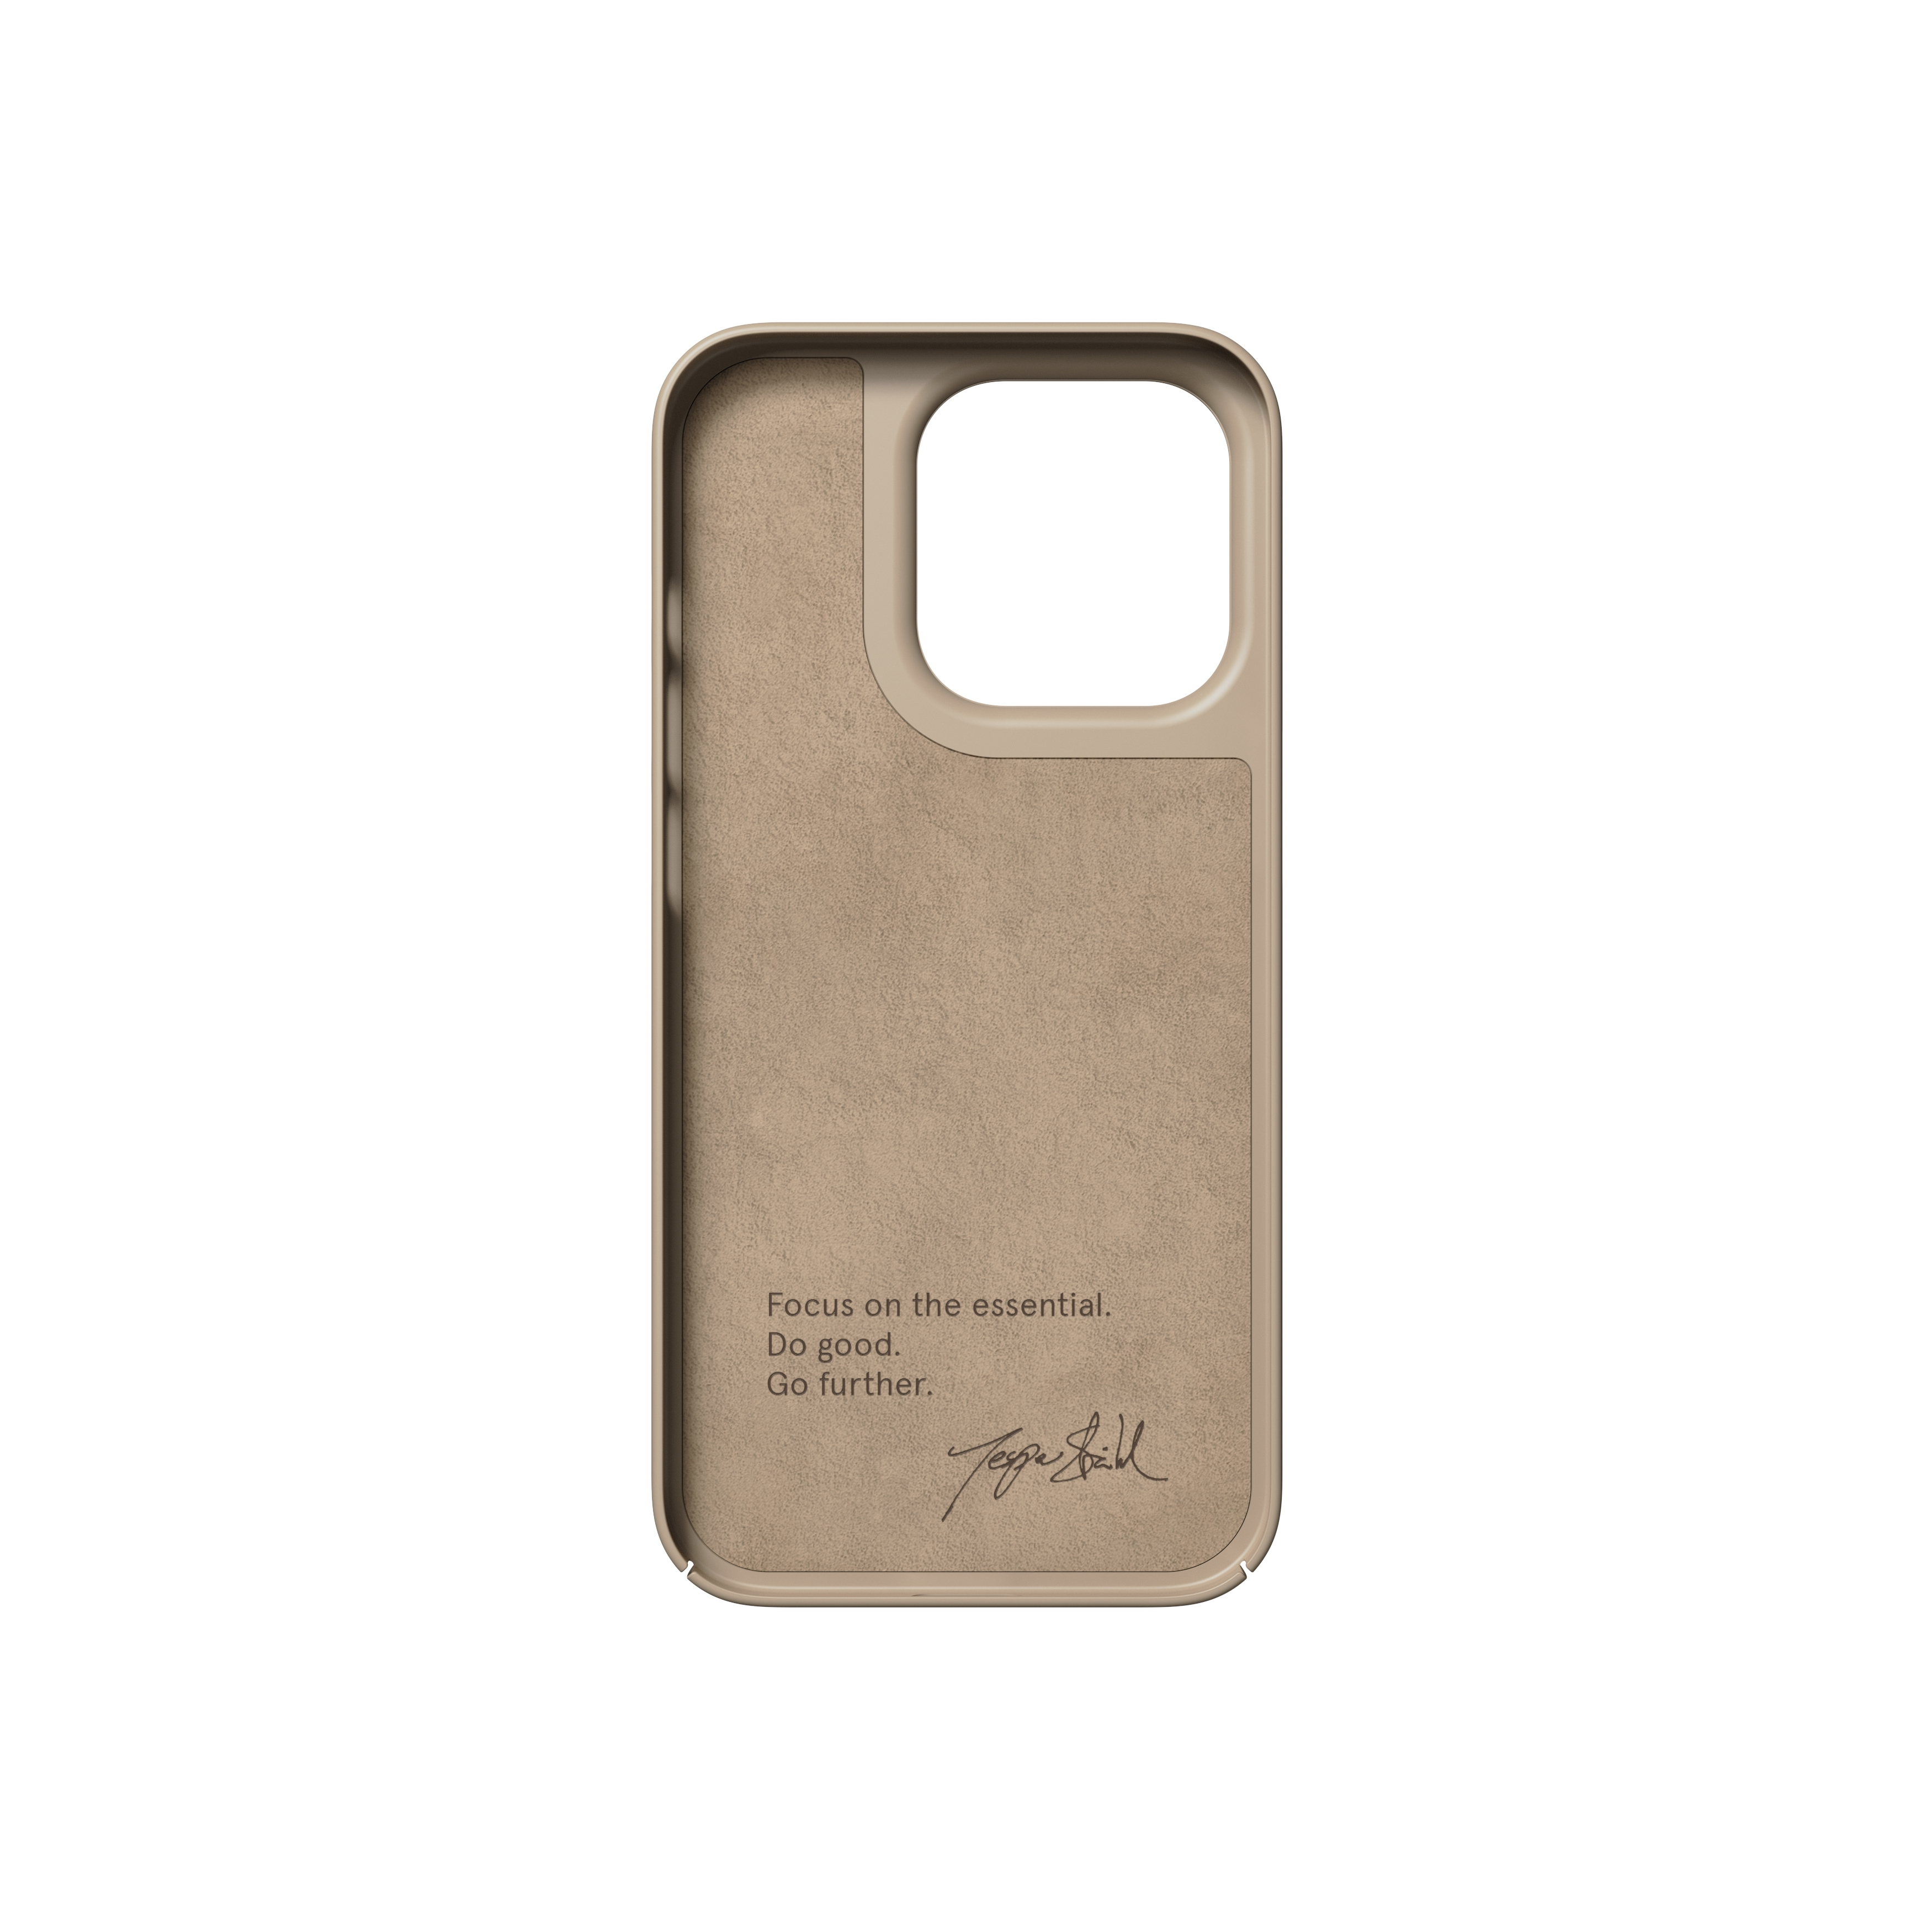 14 Thin, PRO, APPLE, NUDIENT IPHONE Backcover, SAND